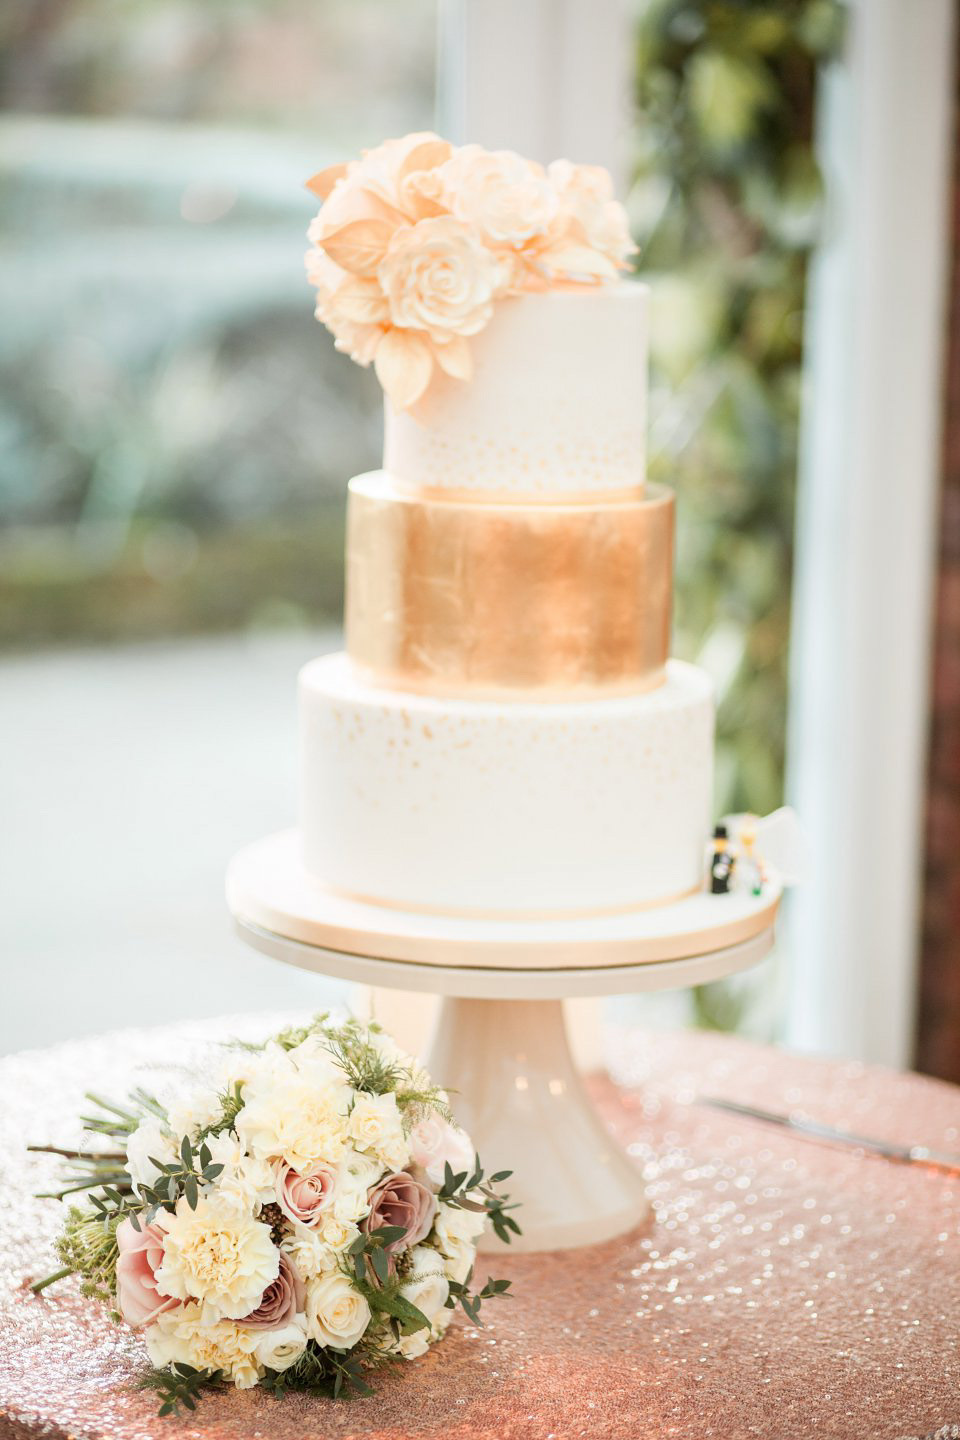 A blush pink and rose gold wedding at Northbrook Park in Surrey. Photography by Naomi Kenton. The bride wears Bridal Rosa Couture from The Bridal Rooms of Worcester.